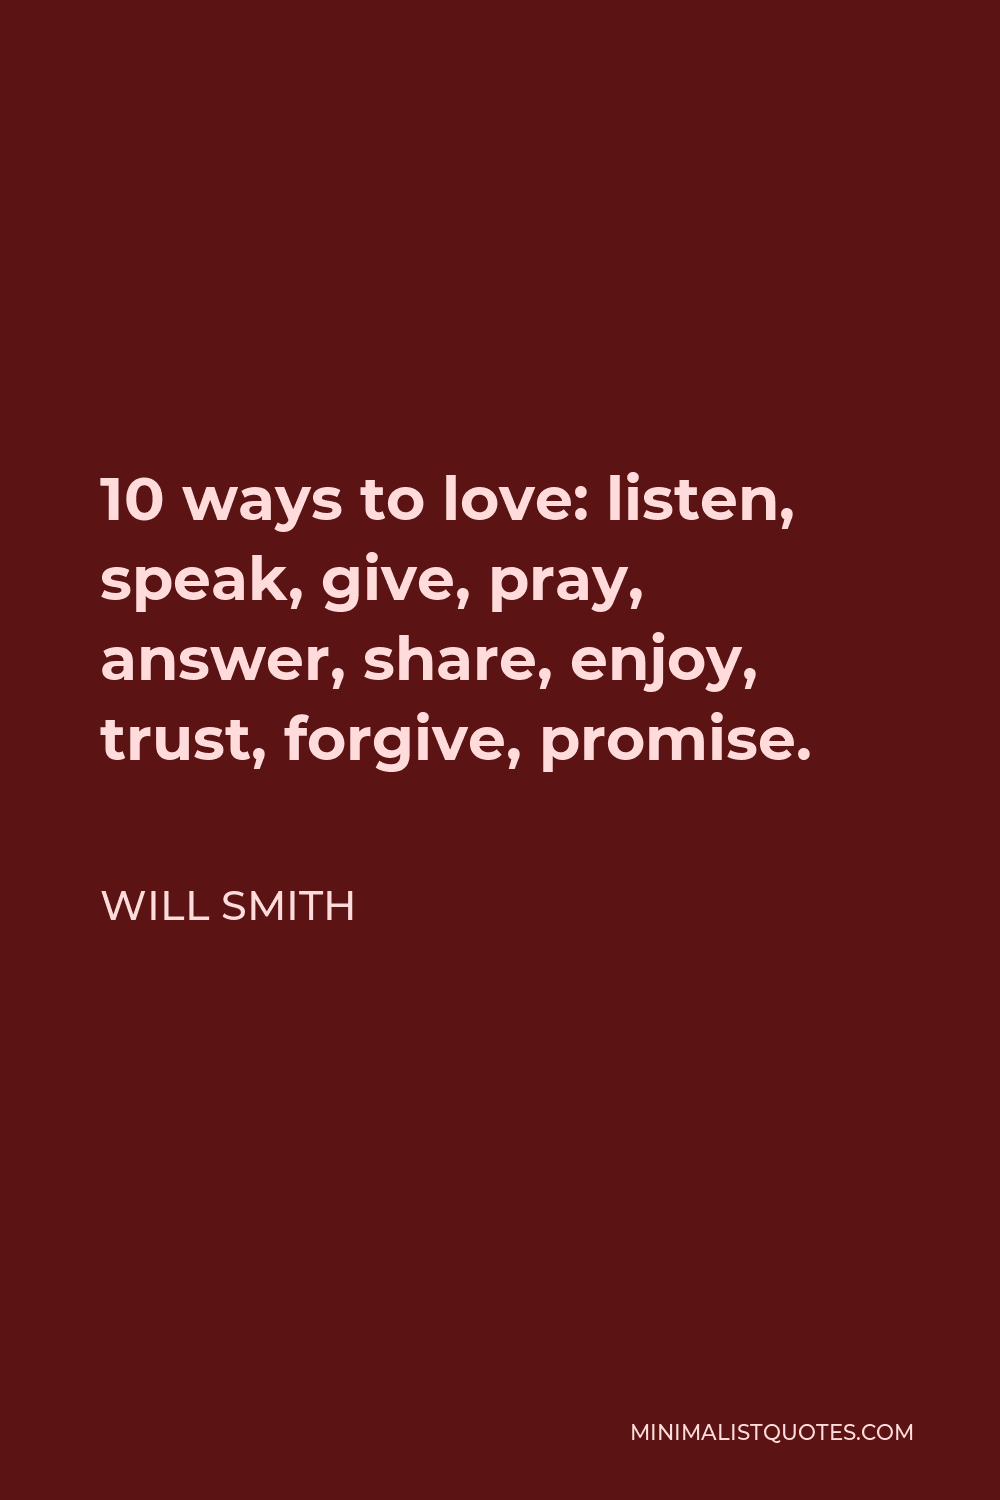 Will Smith Quote - 10 ways to love: listen, speak, give, pray, answer, share, enjoy, trust, forgive, promise.